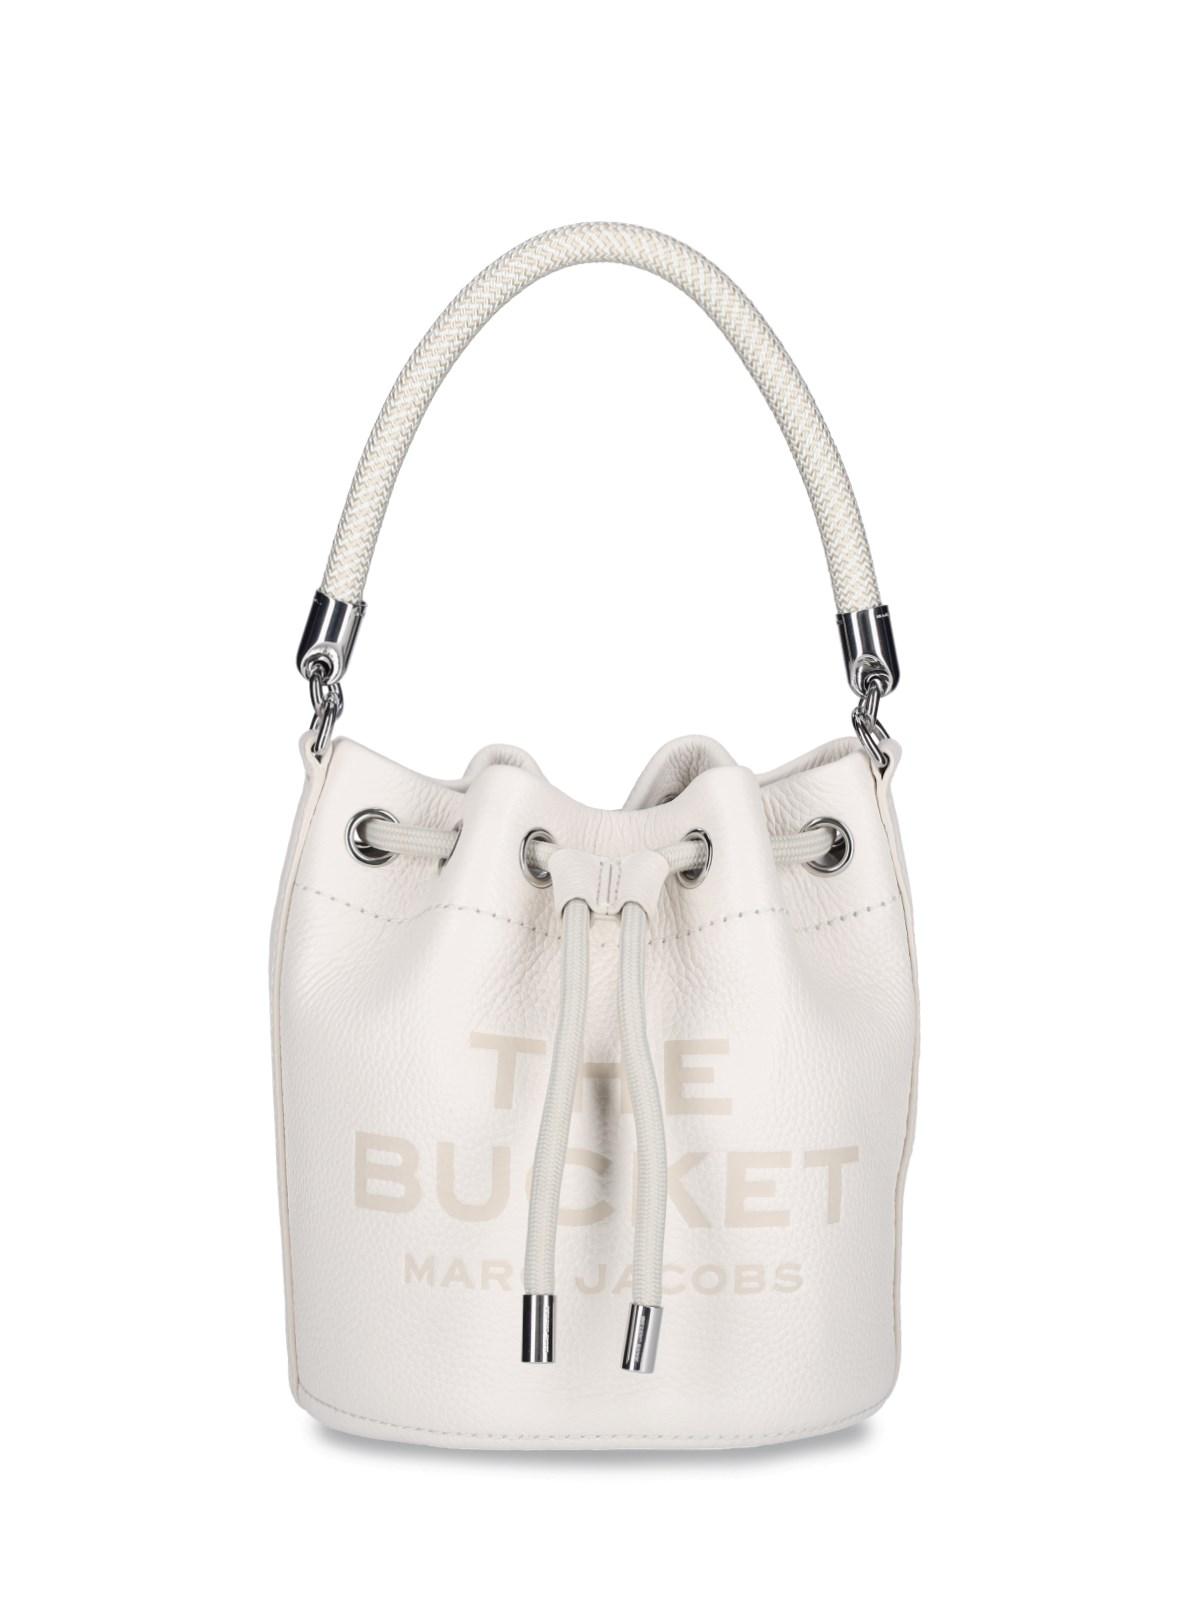 Marc Jacobs 'the Leather Bucket' Bag in White | Lyst